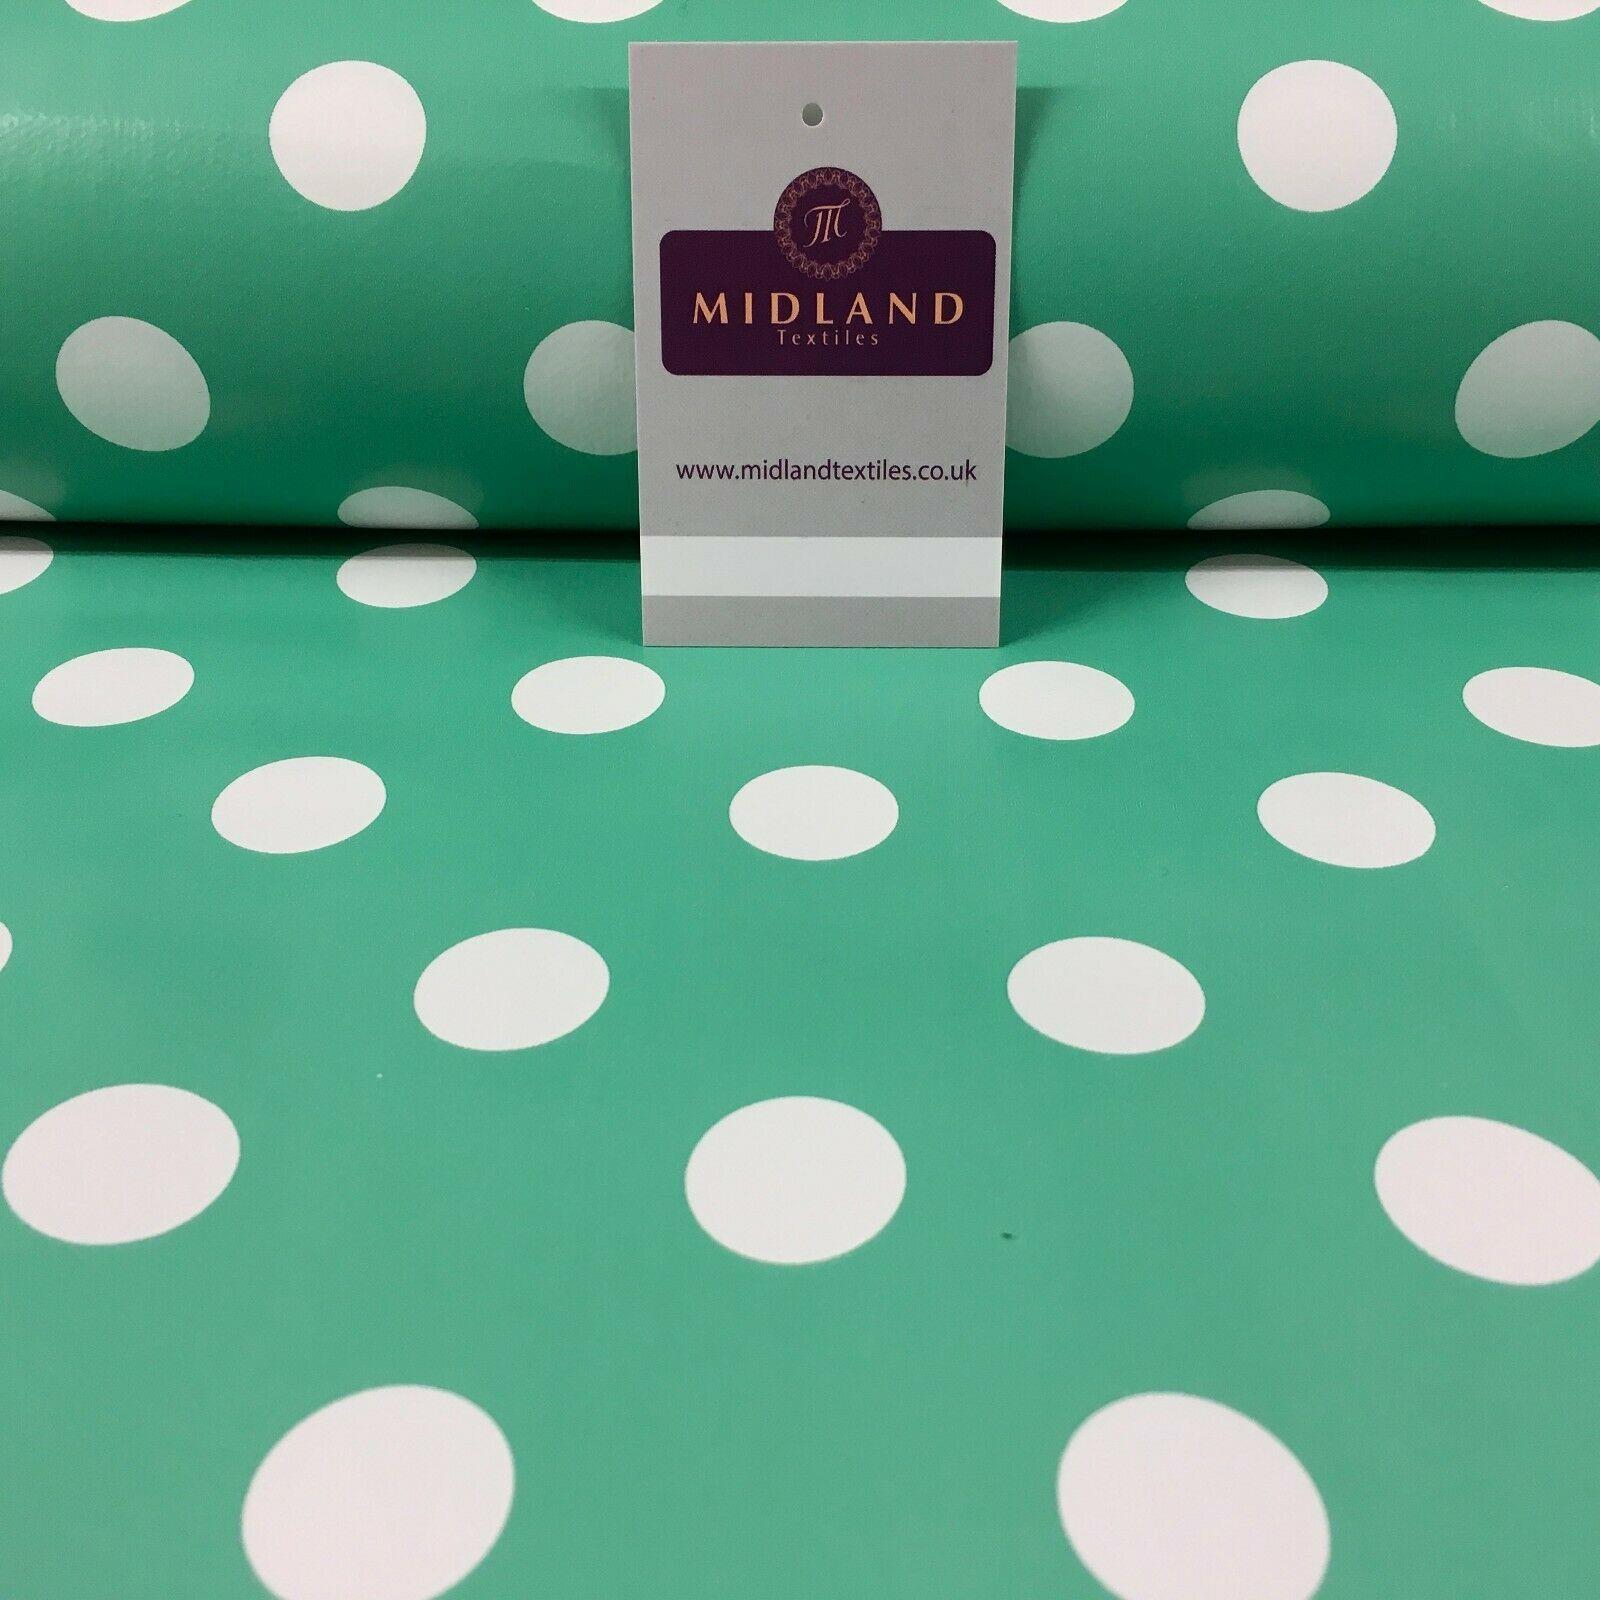 Spotted Wipe clean Tablecloth oilcloth vinyl PVC Spot polka dot 140cm wide M40